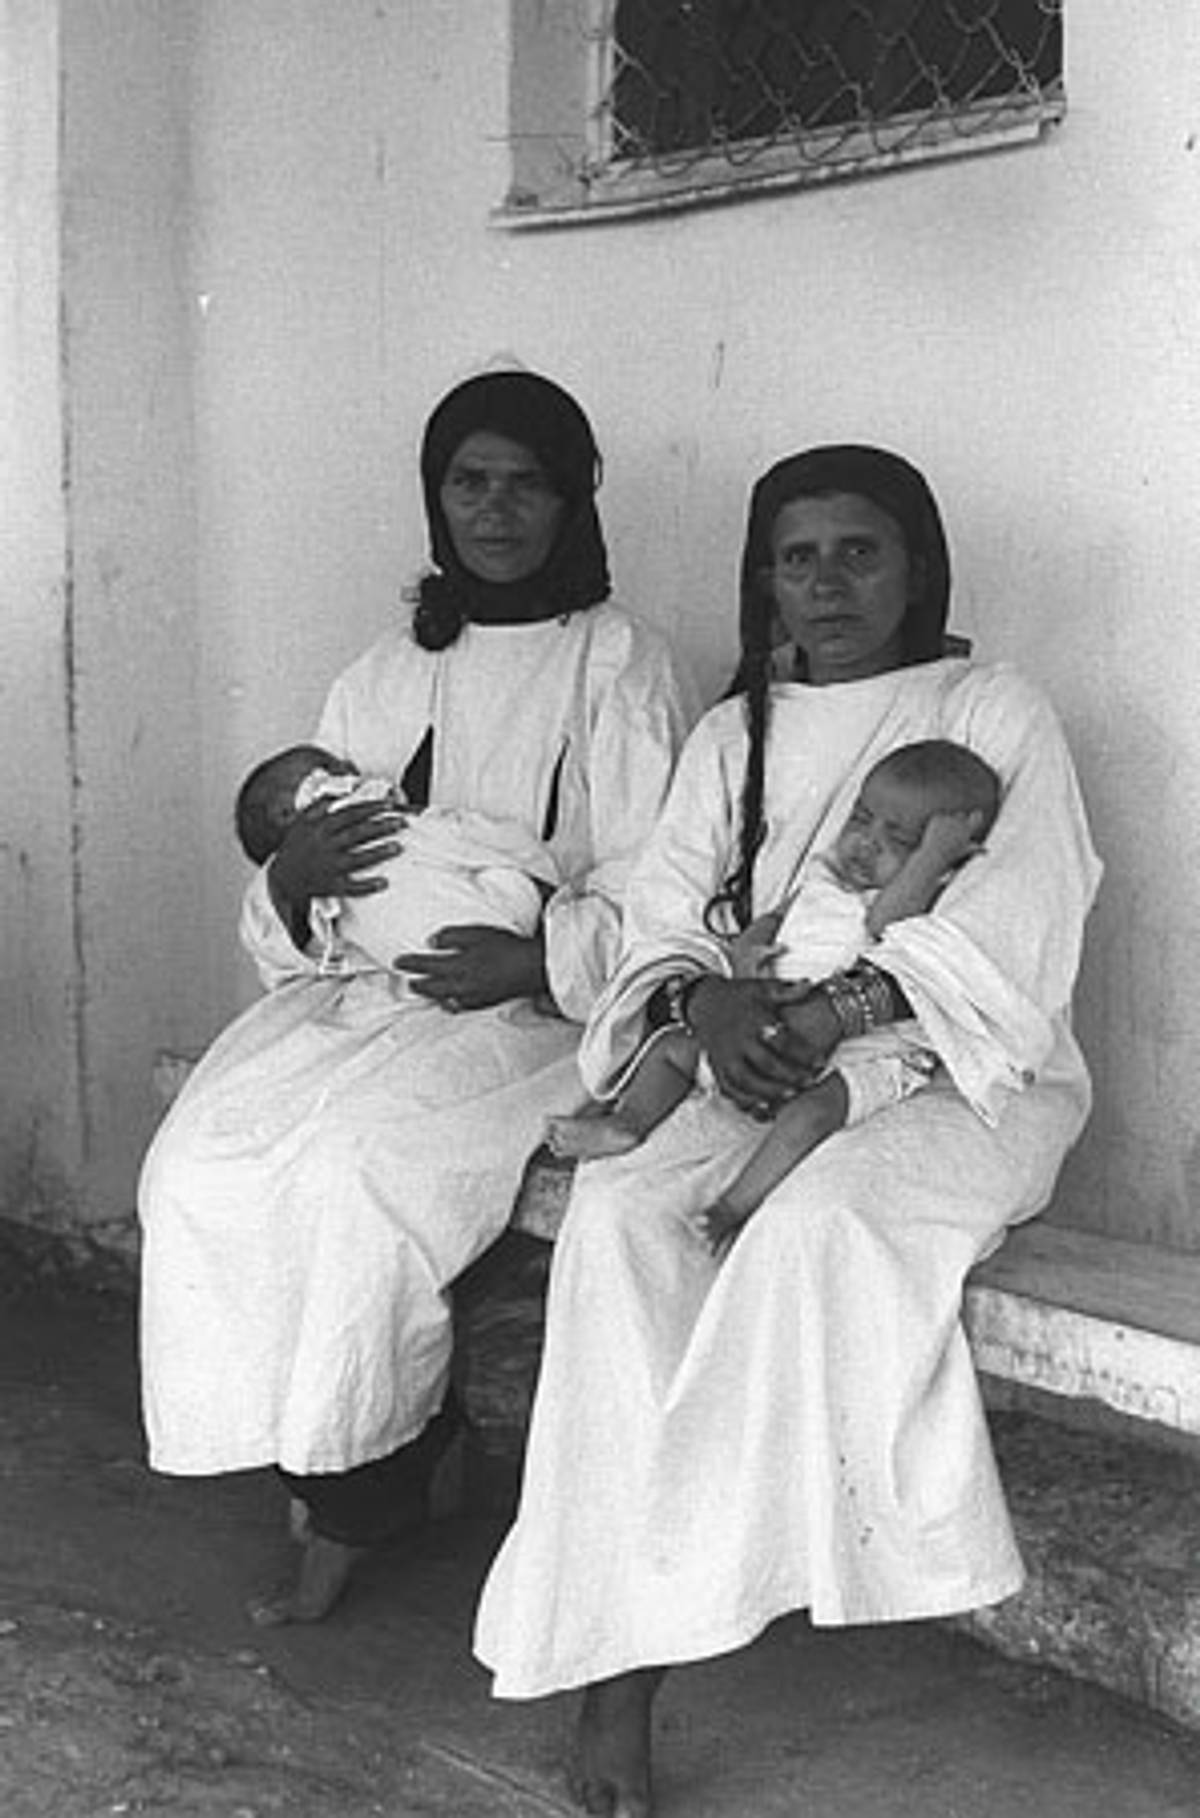 Yemeni immigrant mothers visit their infants at a hospital in Ein Shemer, 1950 (National Photo Collection)